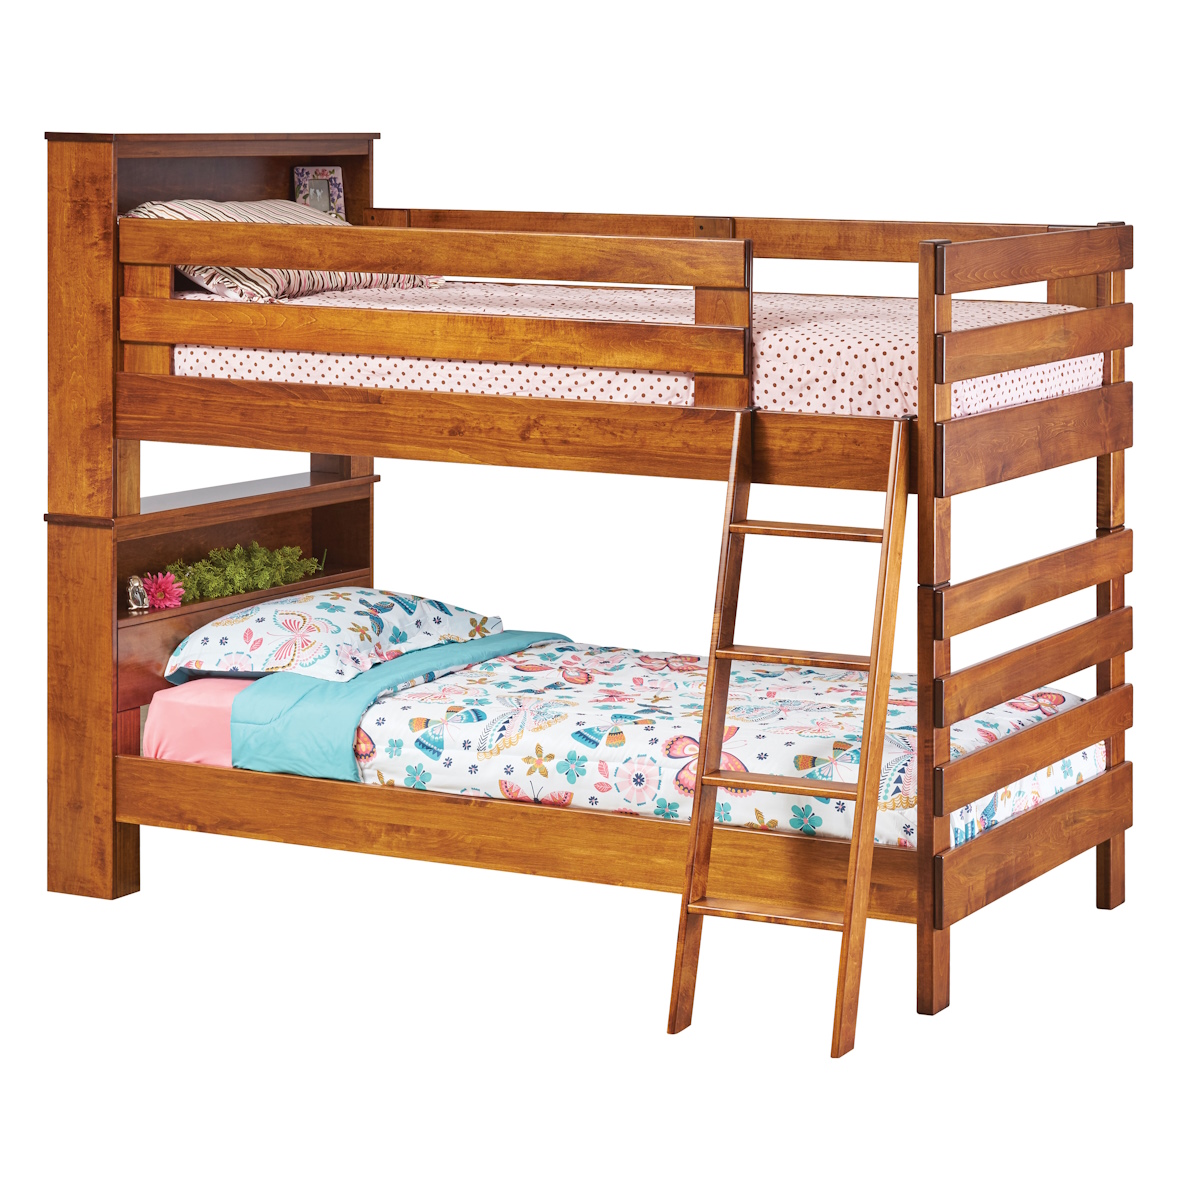 Child’s Bookcase Bunk Bed Image